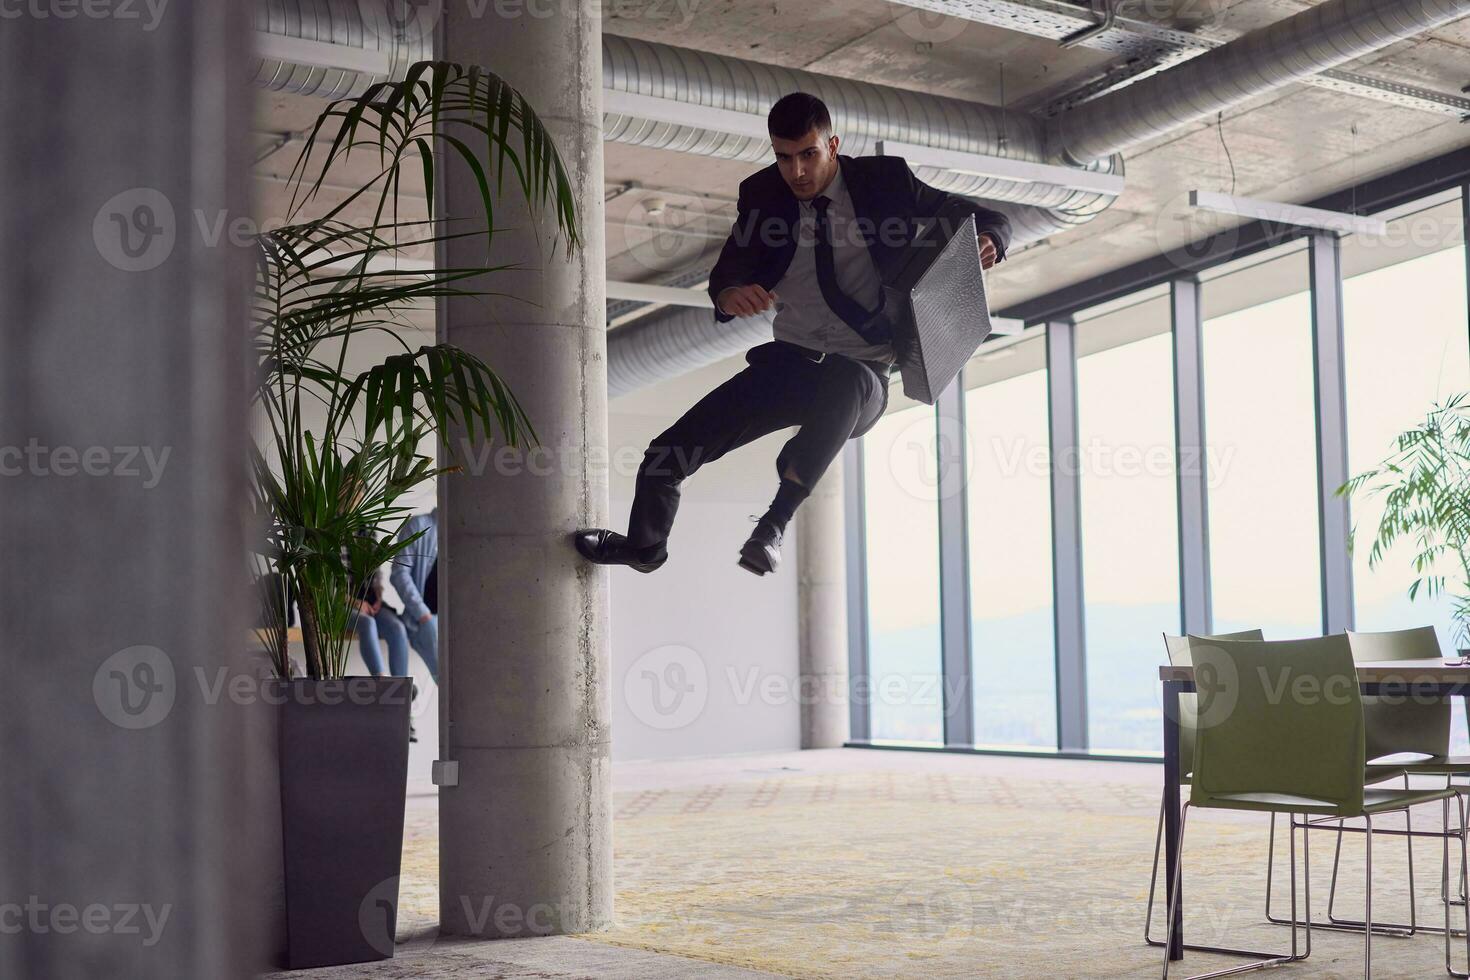 In the modern office, a businessman with a briefcase captivates everyone as he performs thrilling aerial acrobatics, defying gravity with his daring leaps and showcasing his agility with breathtaking showmanship. photo